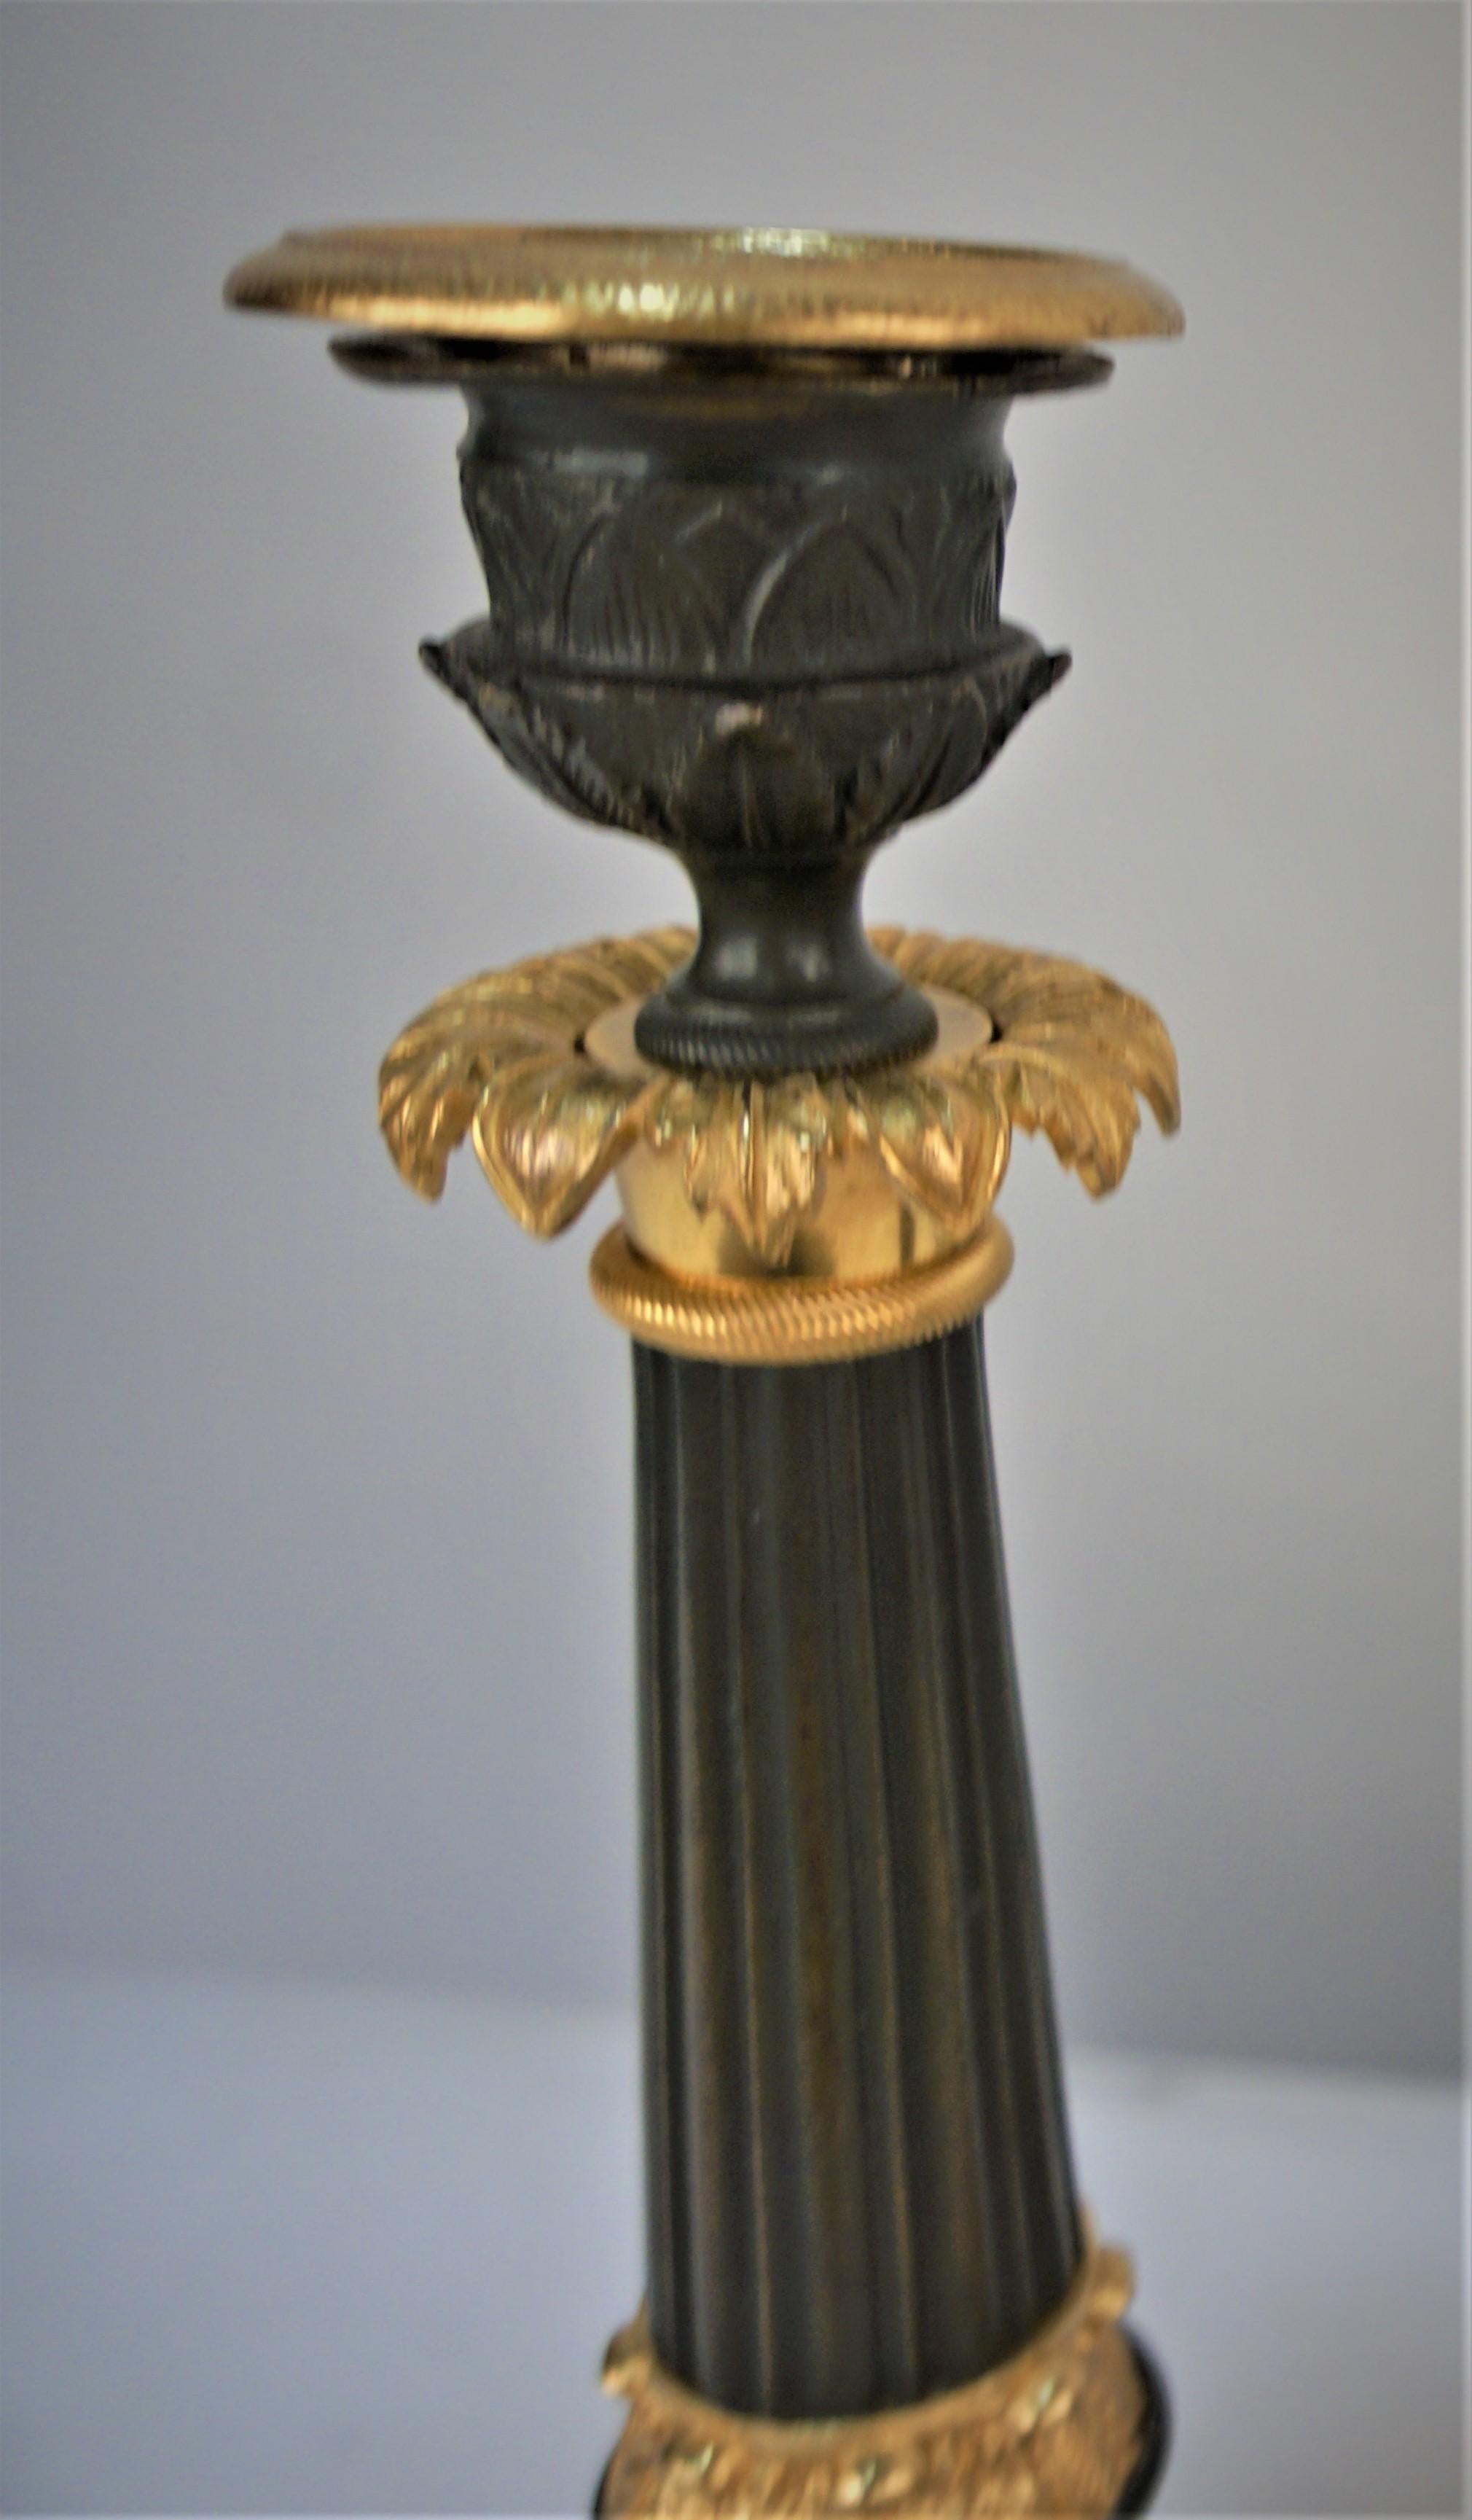 A pair of 19th century Regency gilt bronze and black candlesticks, with three lion's claws.